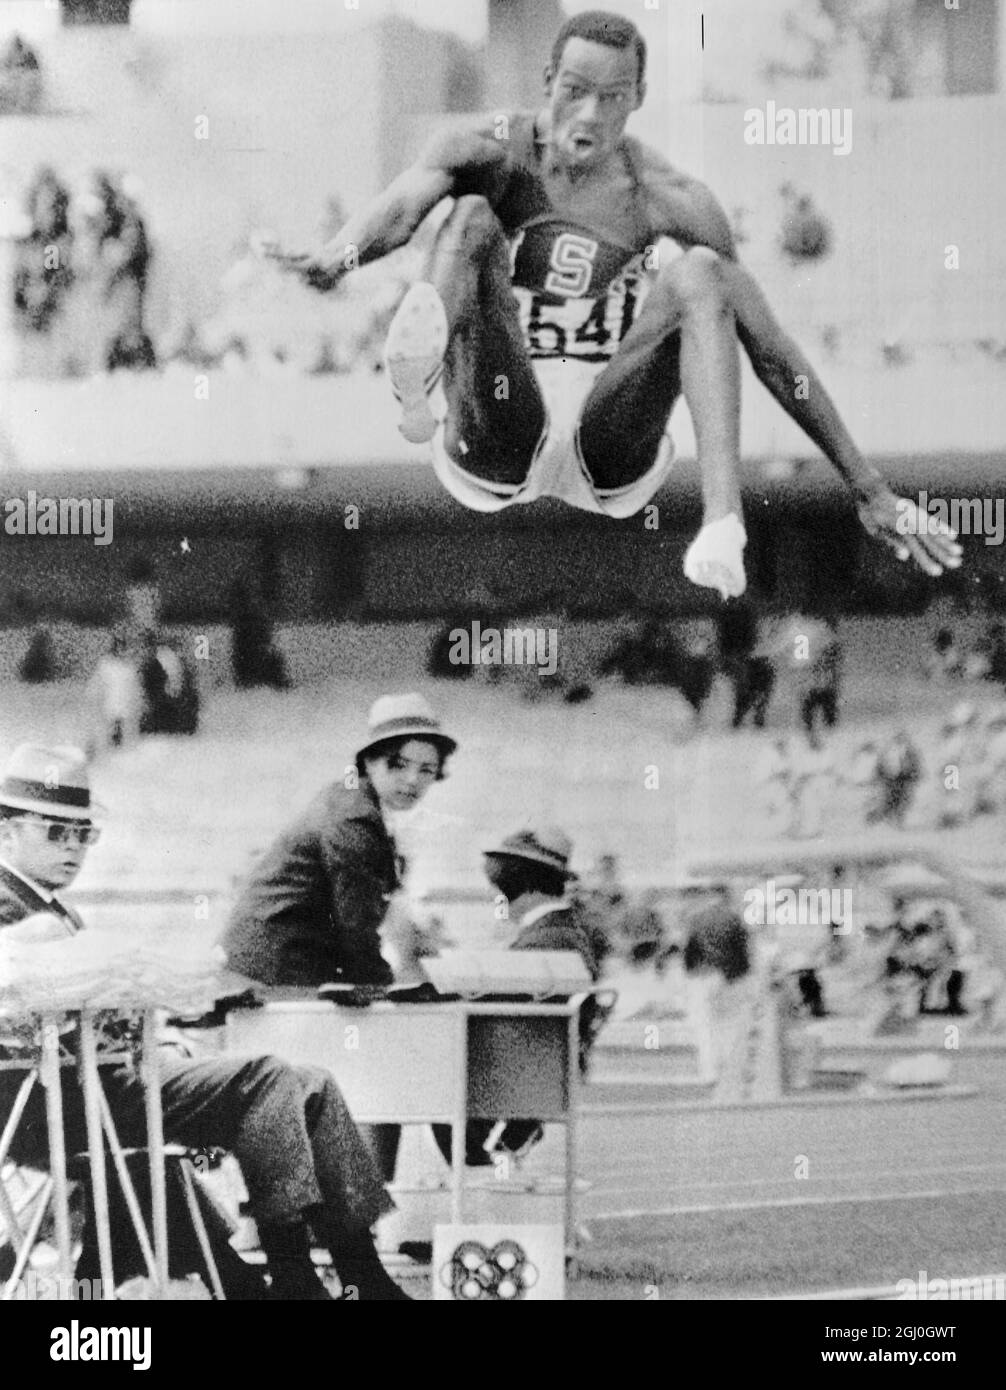 Bob Beamon of el Paso Texas USA in a prodigious leap which bettered the old world record by more than two feet leaps 29 feet 2 half inches at the mens long jump event to win Olympic Gold medal in the 19th Olympic Games 189 October Mexico City 1968 Stock Photo